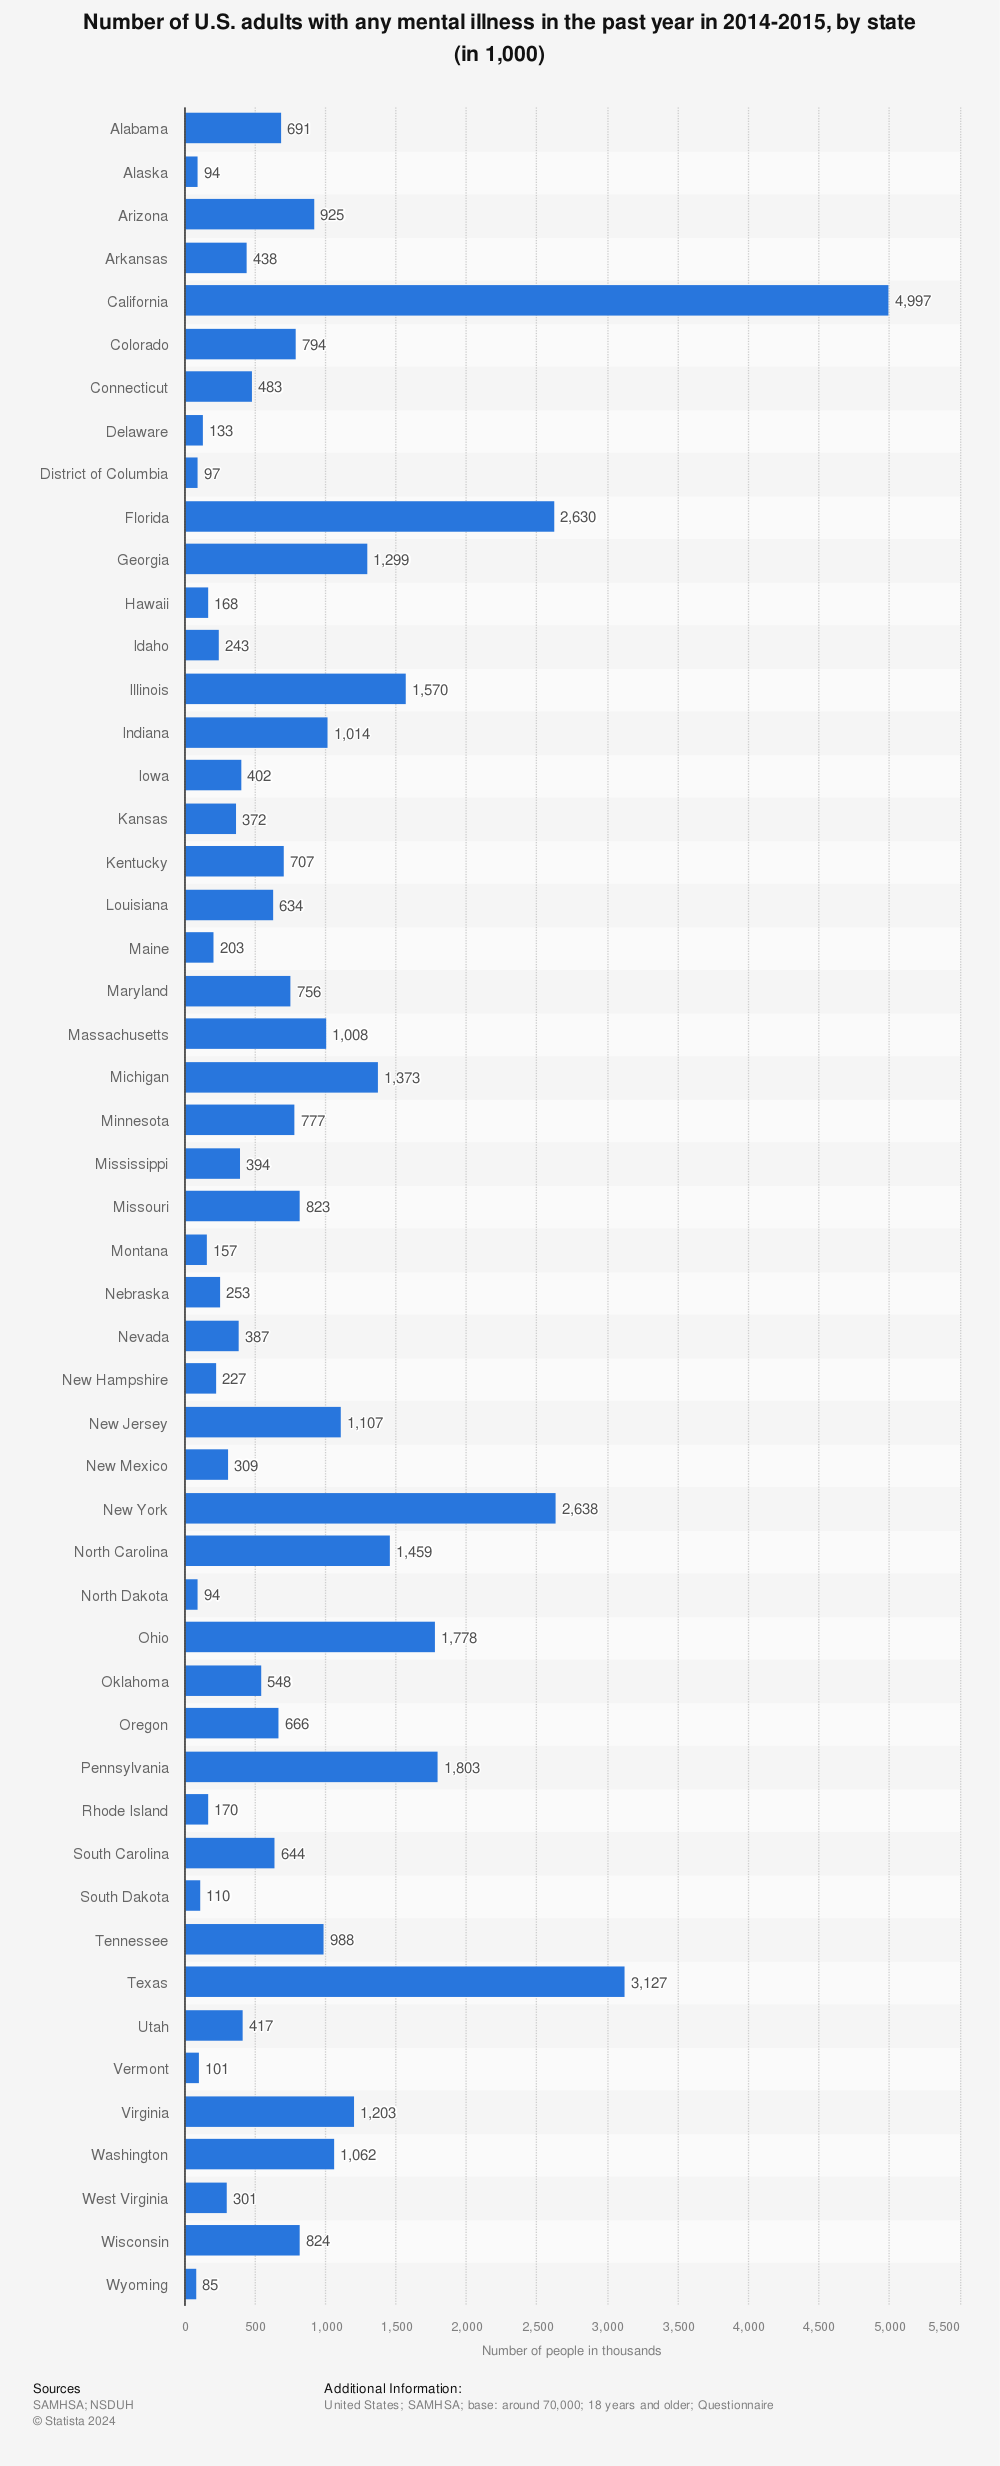 Statistic: Number of U.S. adults with any mental illness in the past year in 2014-2015, by state (in 1,000) | Statista